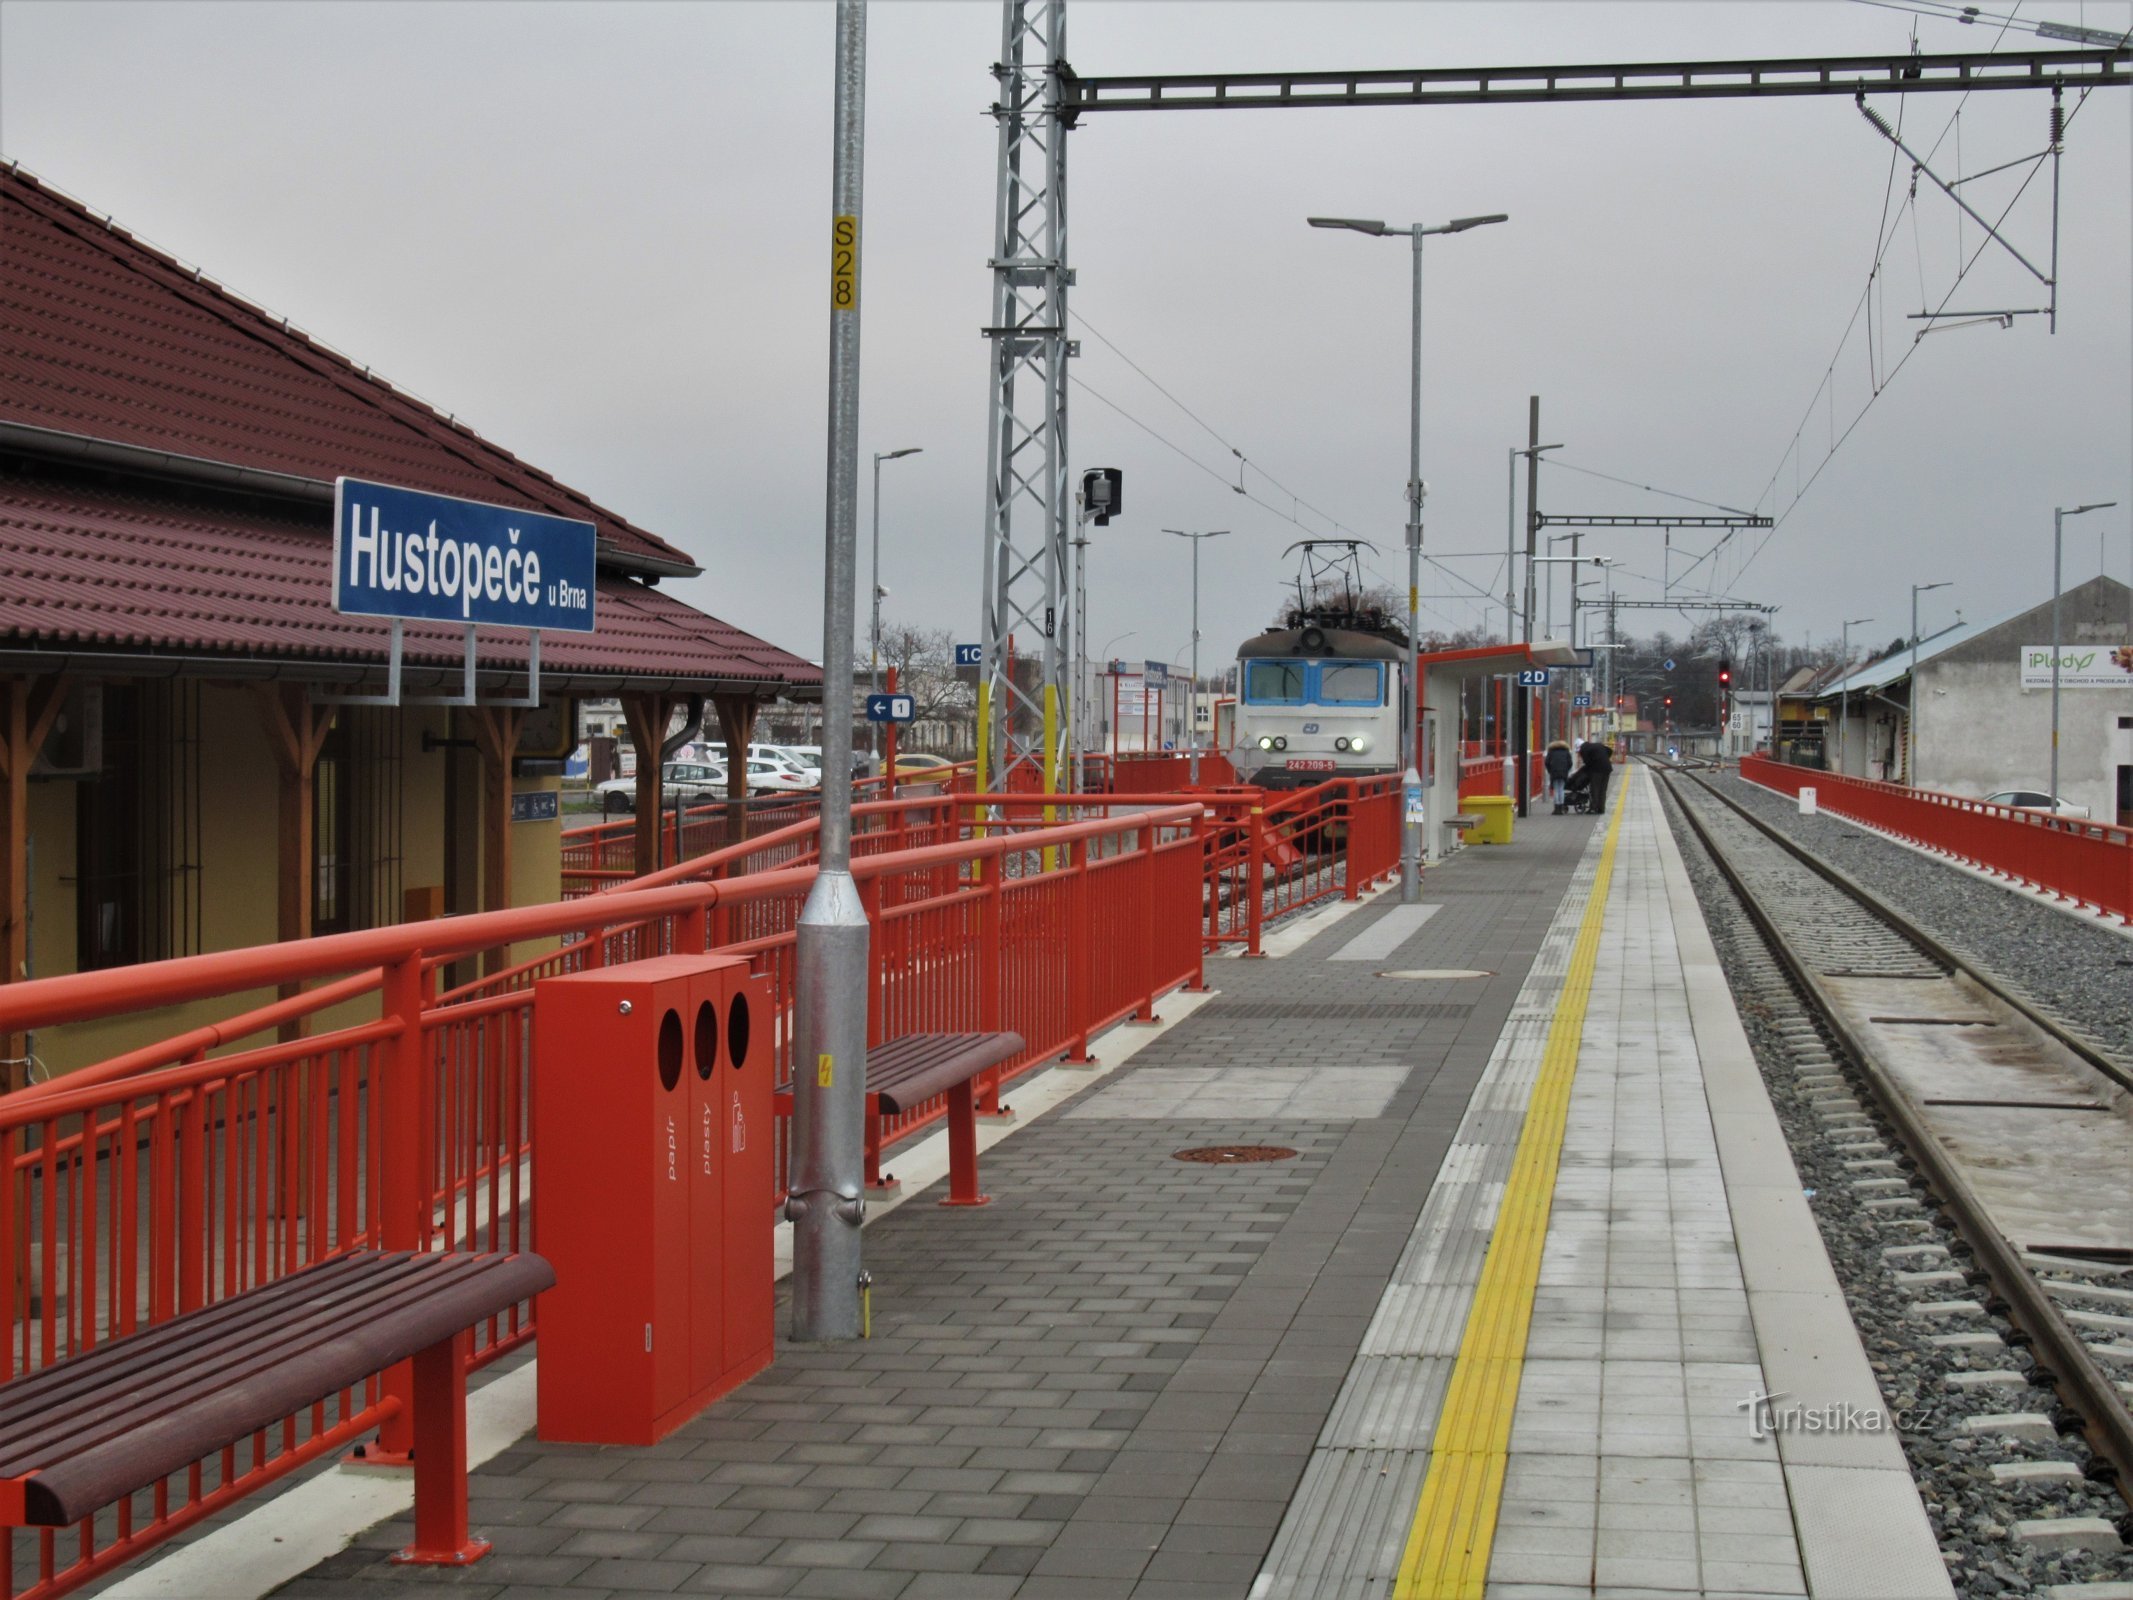 Newly opened electrified station with train arrival in December 2020